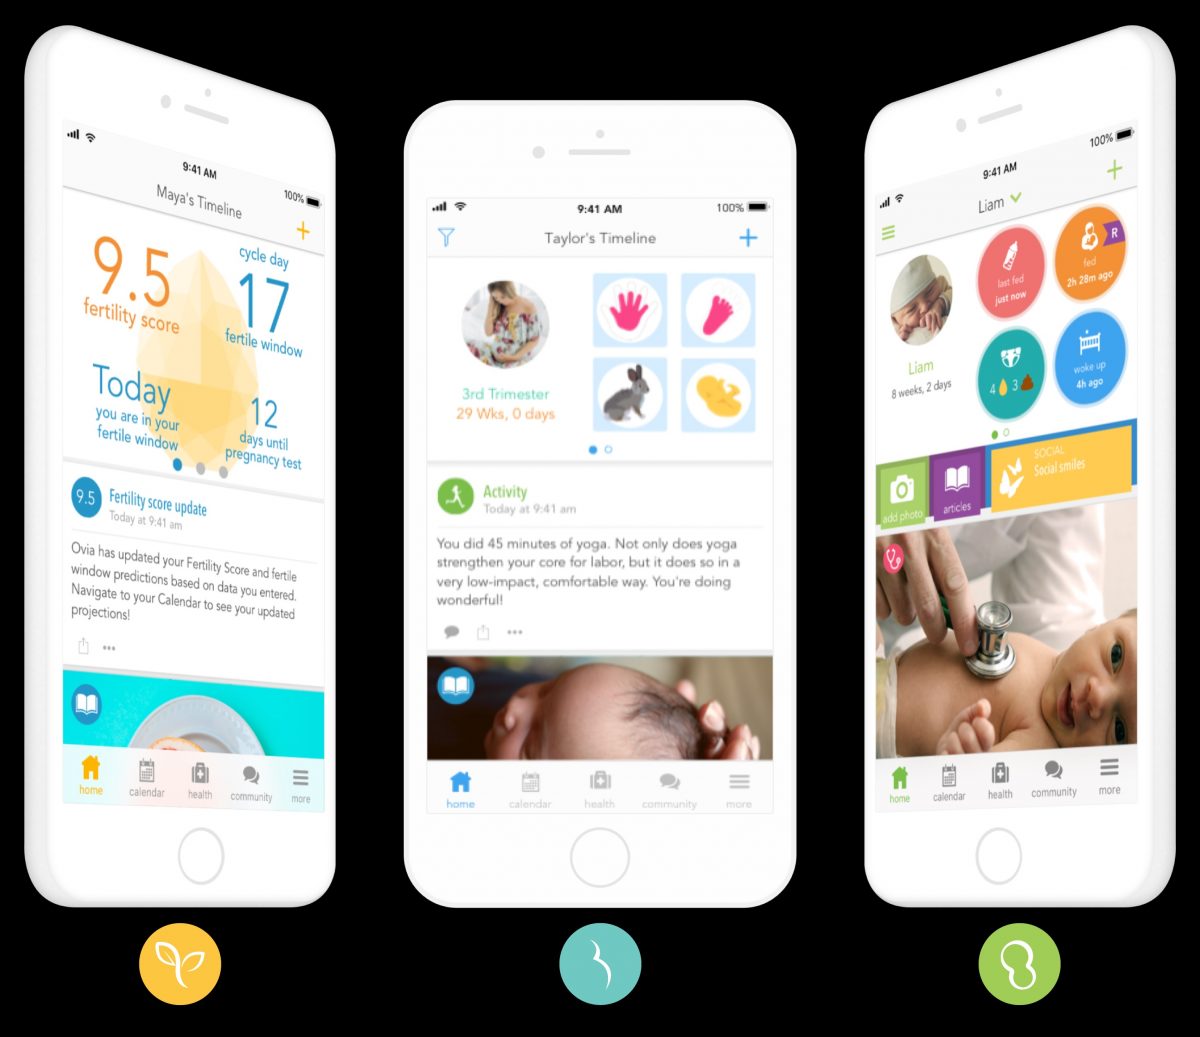 Trying to Get Pregnant? This App Calculates the Fertility Period